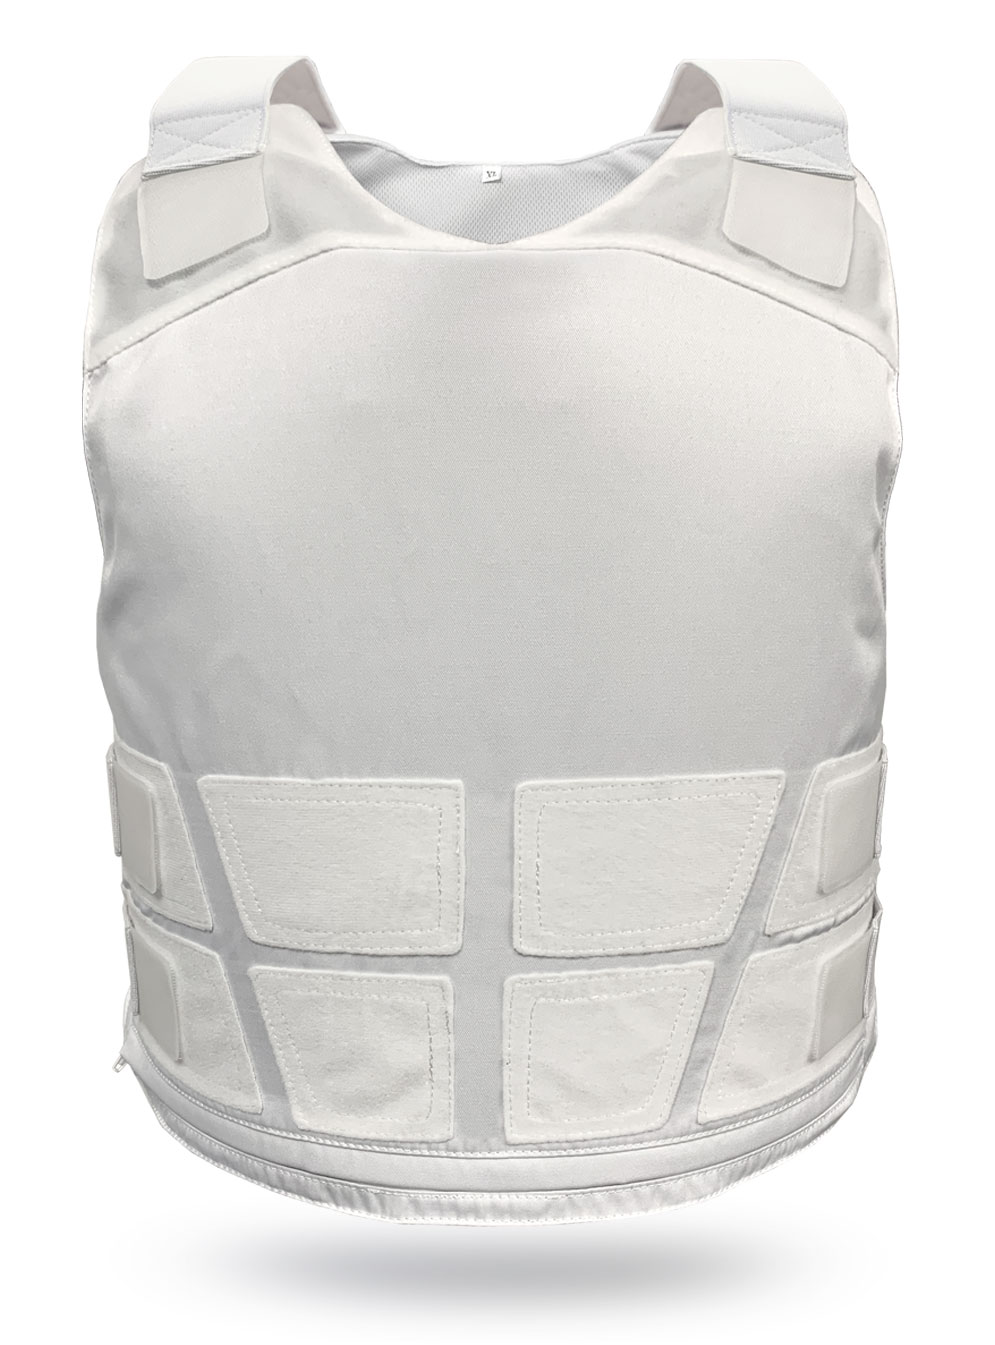 England with aramid and titanium plates Details about   Bulletproof vest 